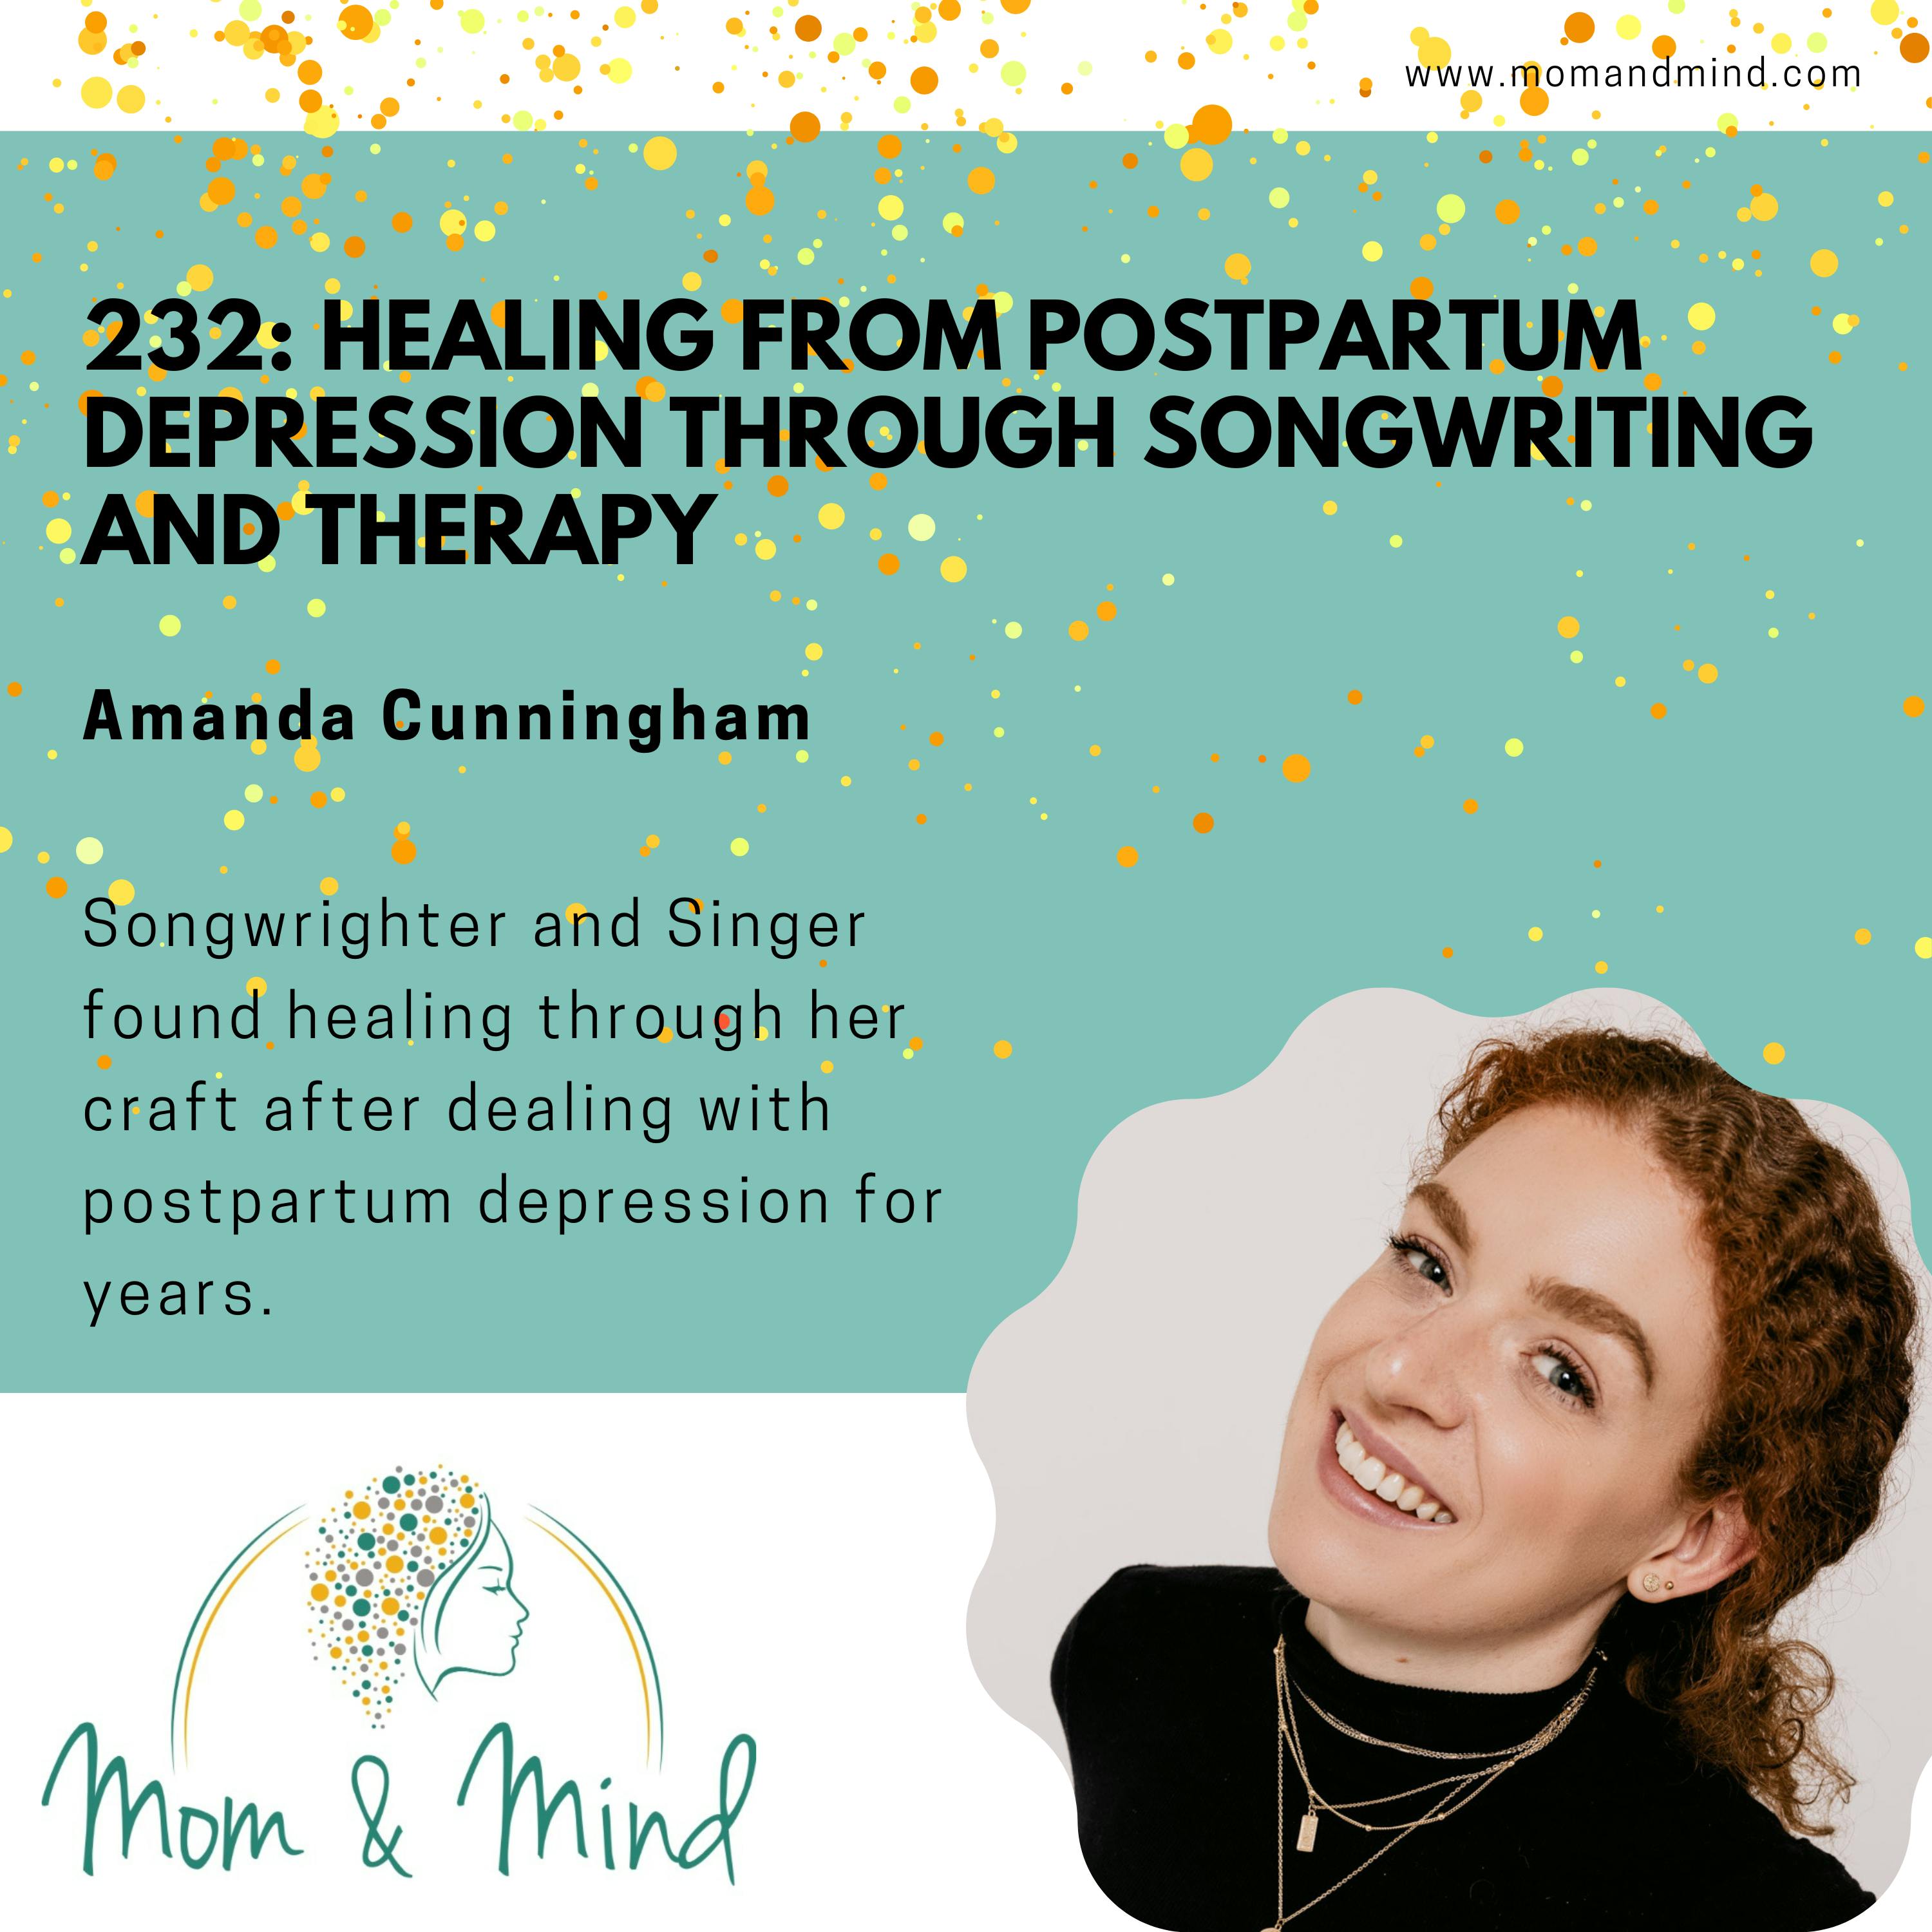 232: Healing from Postpartum Depression through Songwriting and Therapy